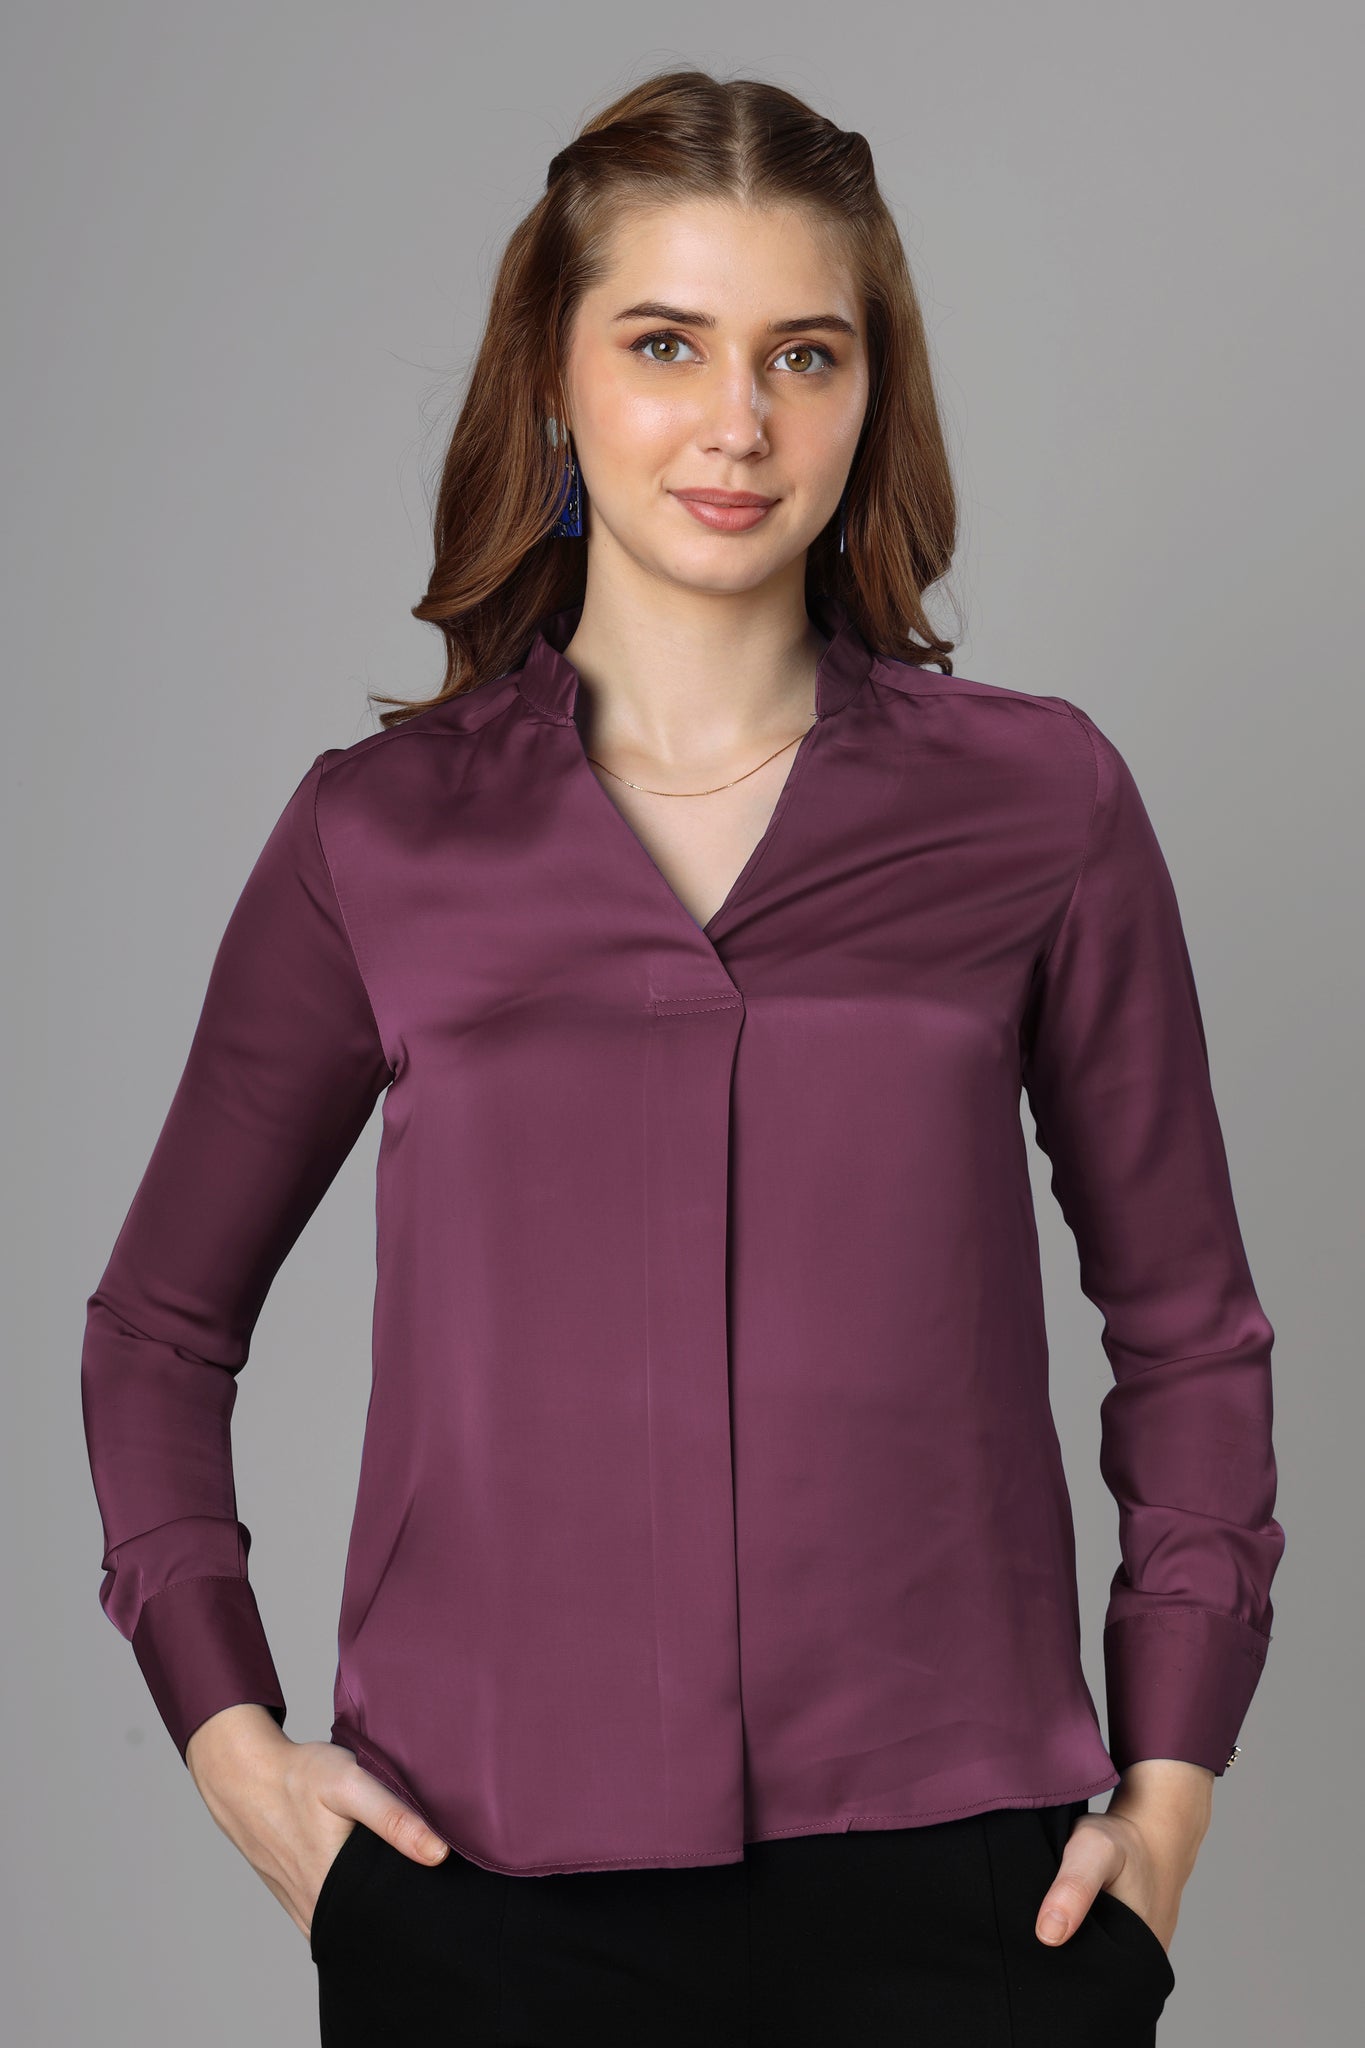 Classic Wine Pink Top For Women